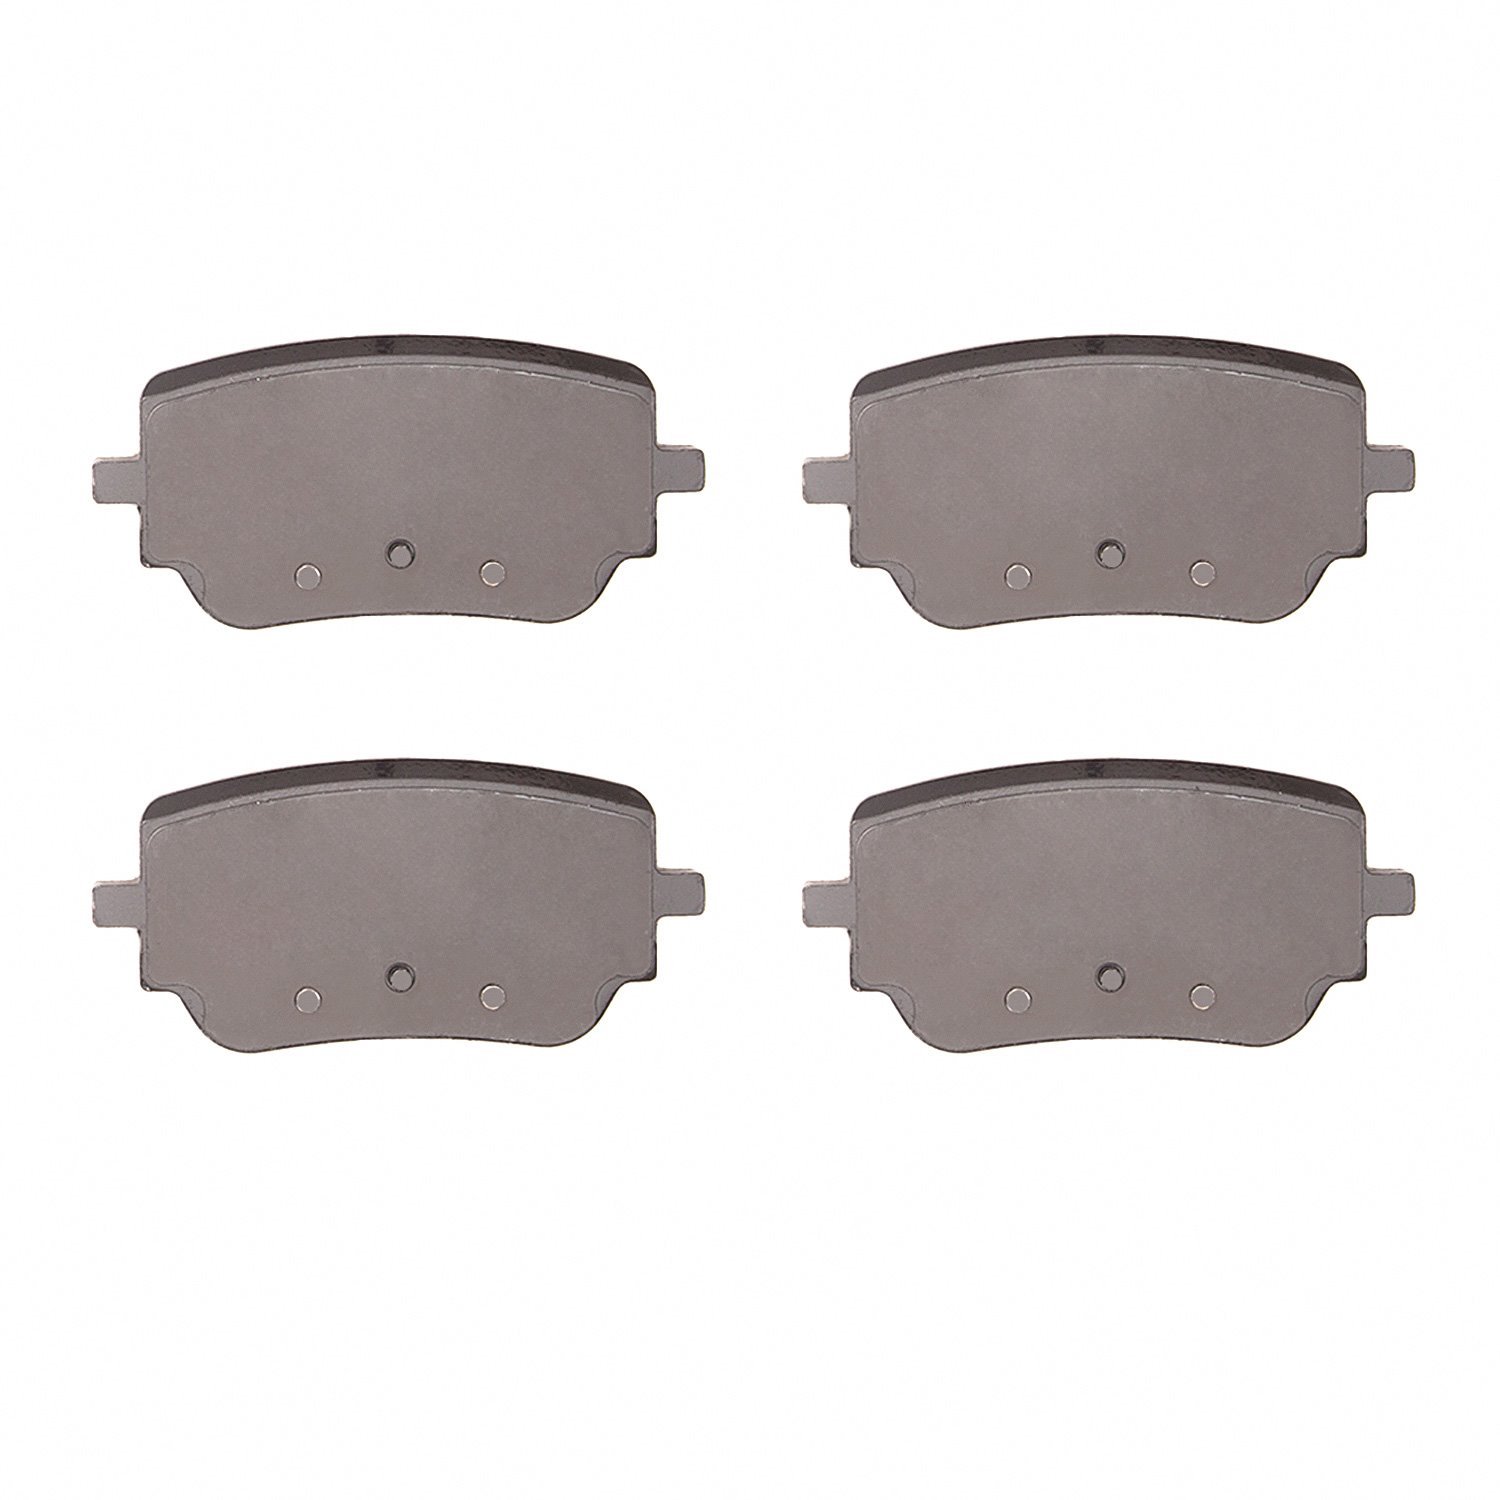 1310-2271-00 3000-Series Ceramic Brake Pads, Fits Select Mercedes-Benz, Position: Rear